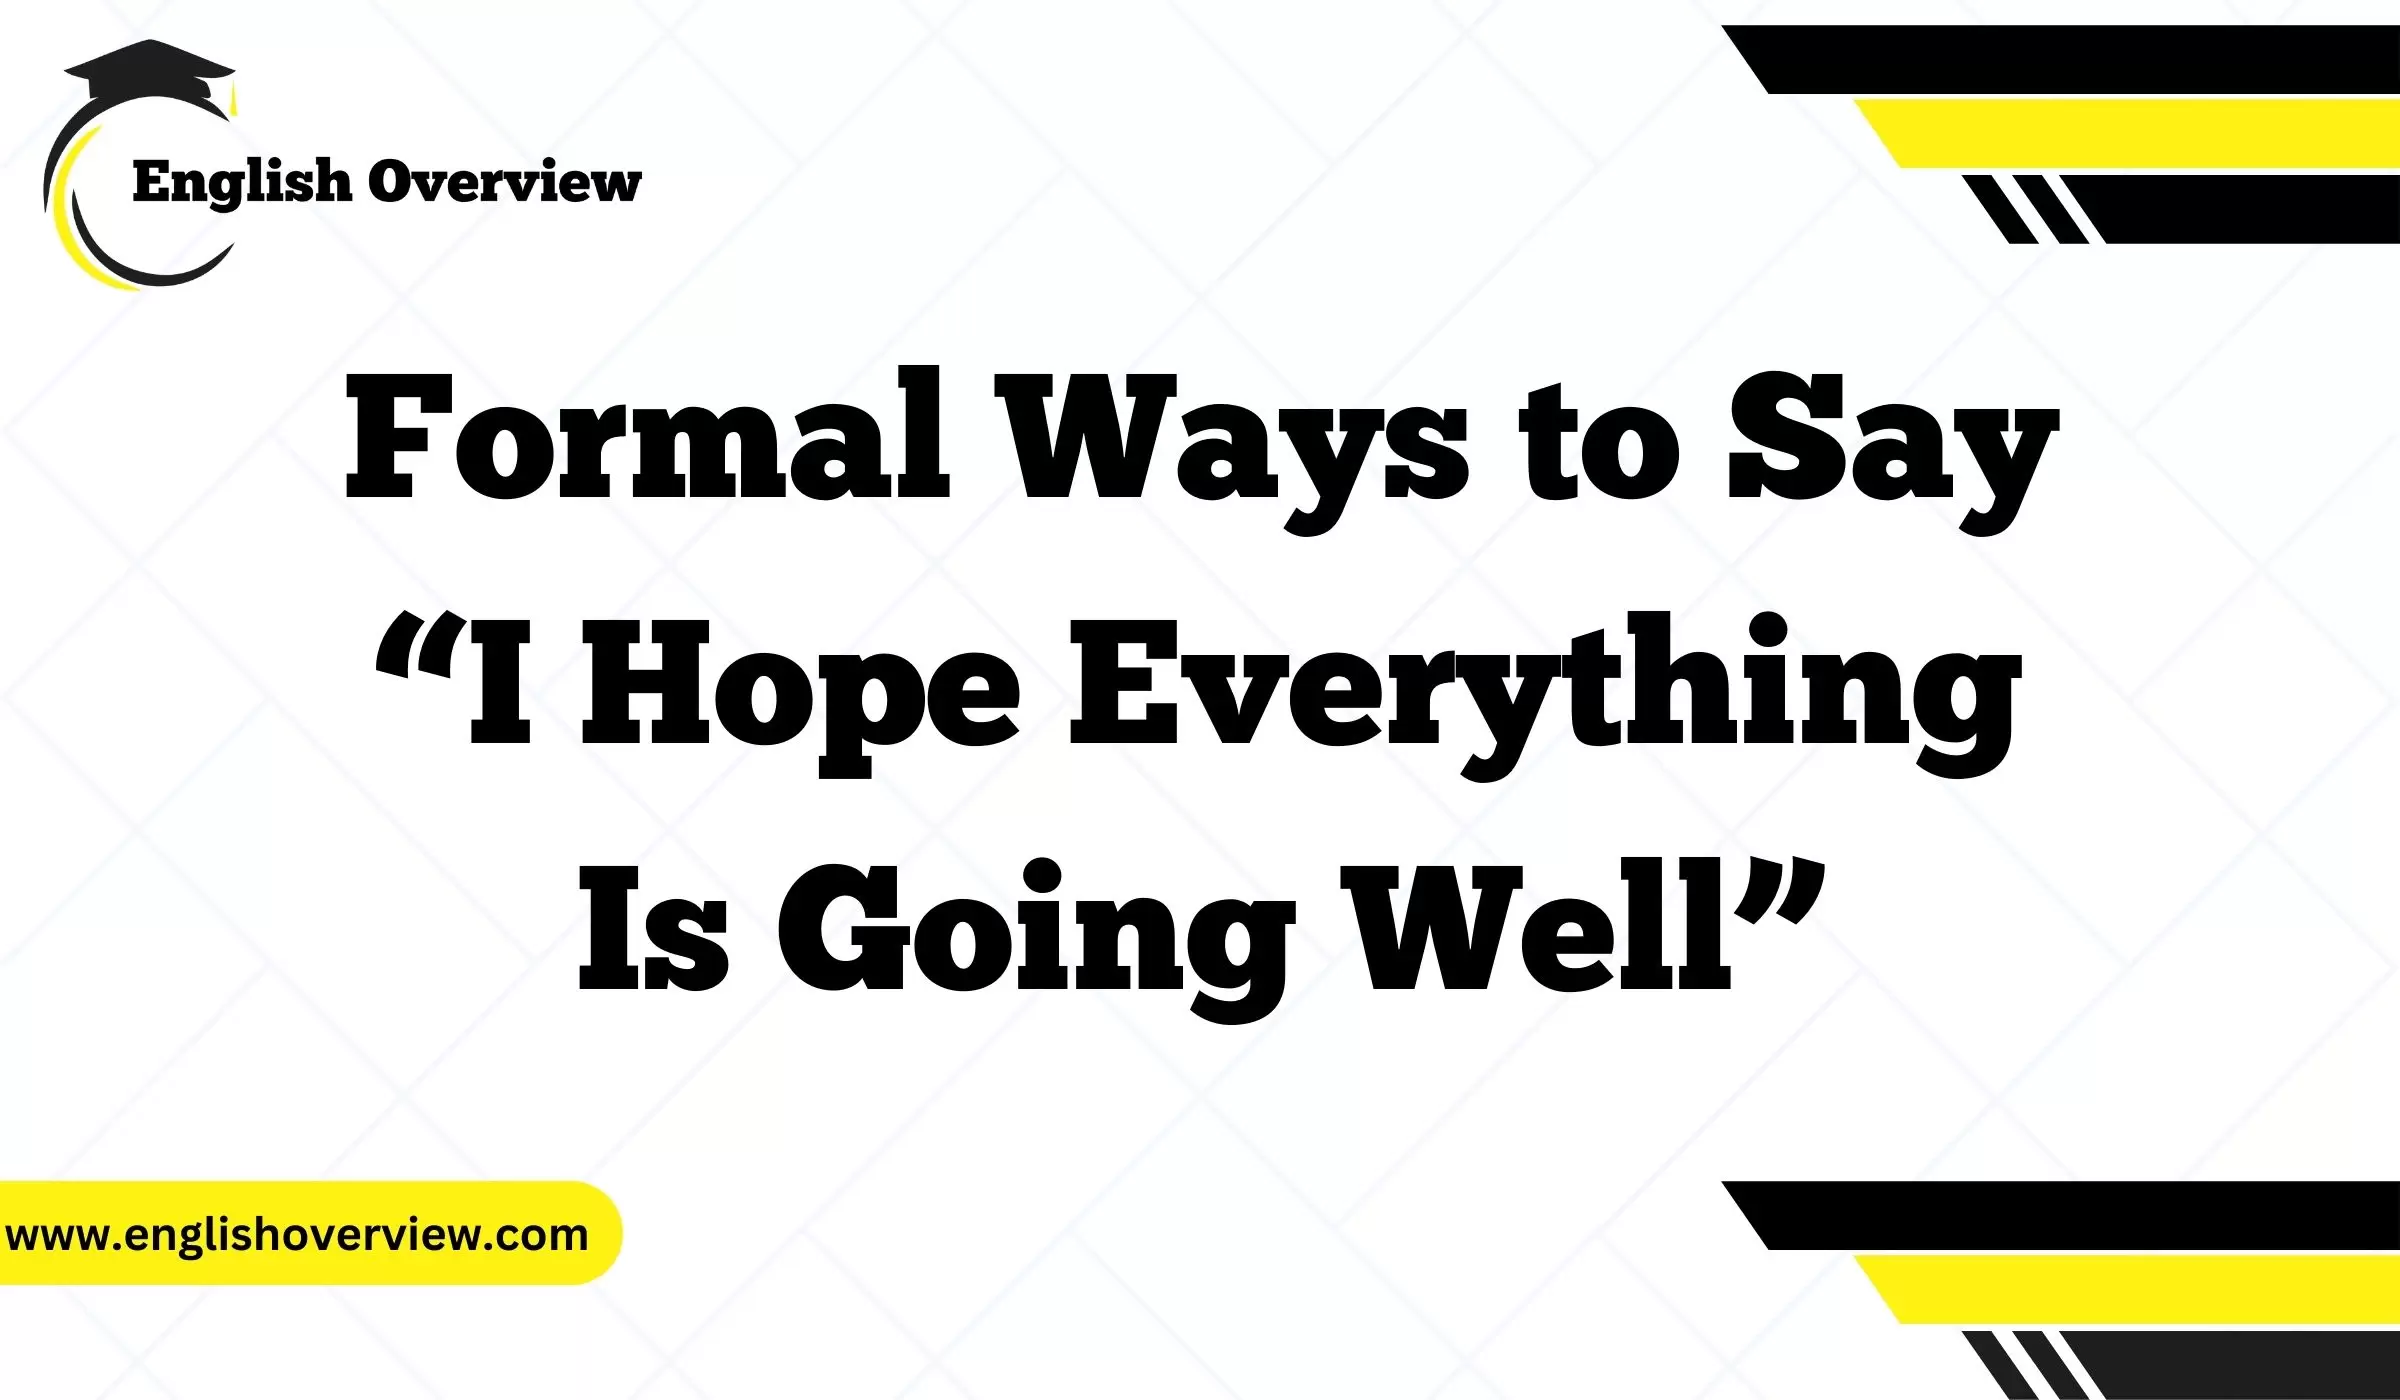 Formal Ways to Say “I Hope Everything Is Going Well”